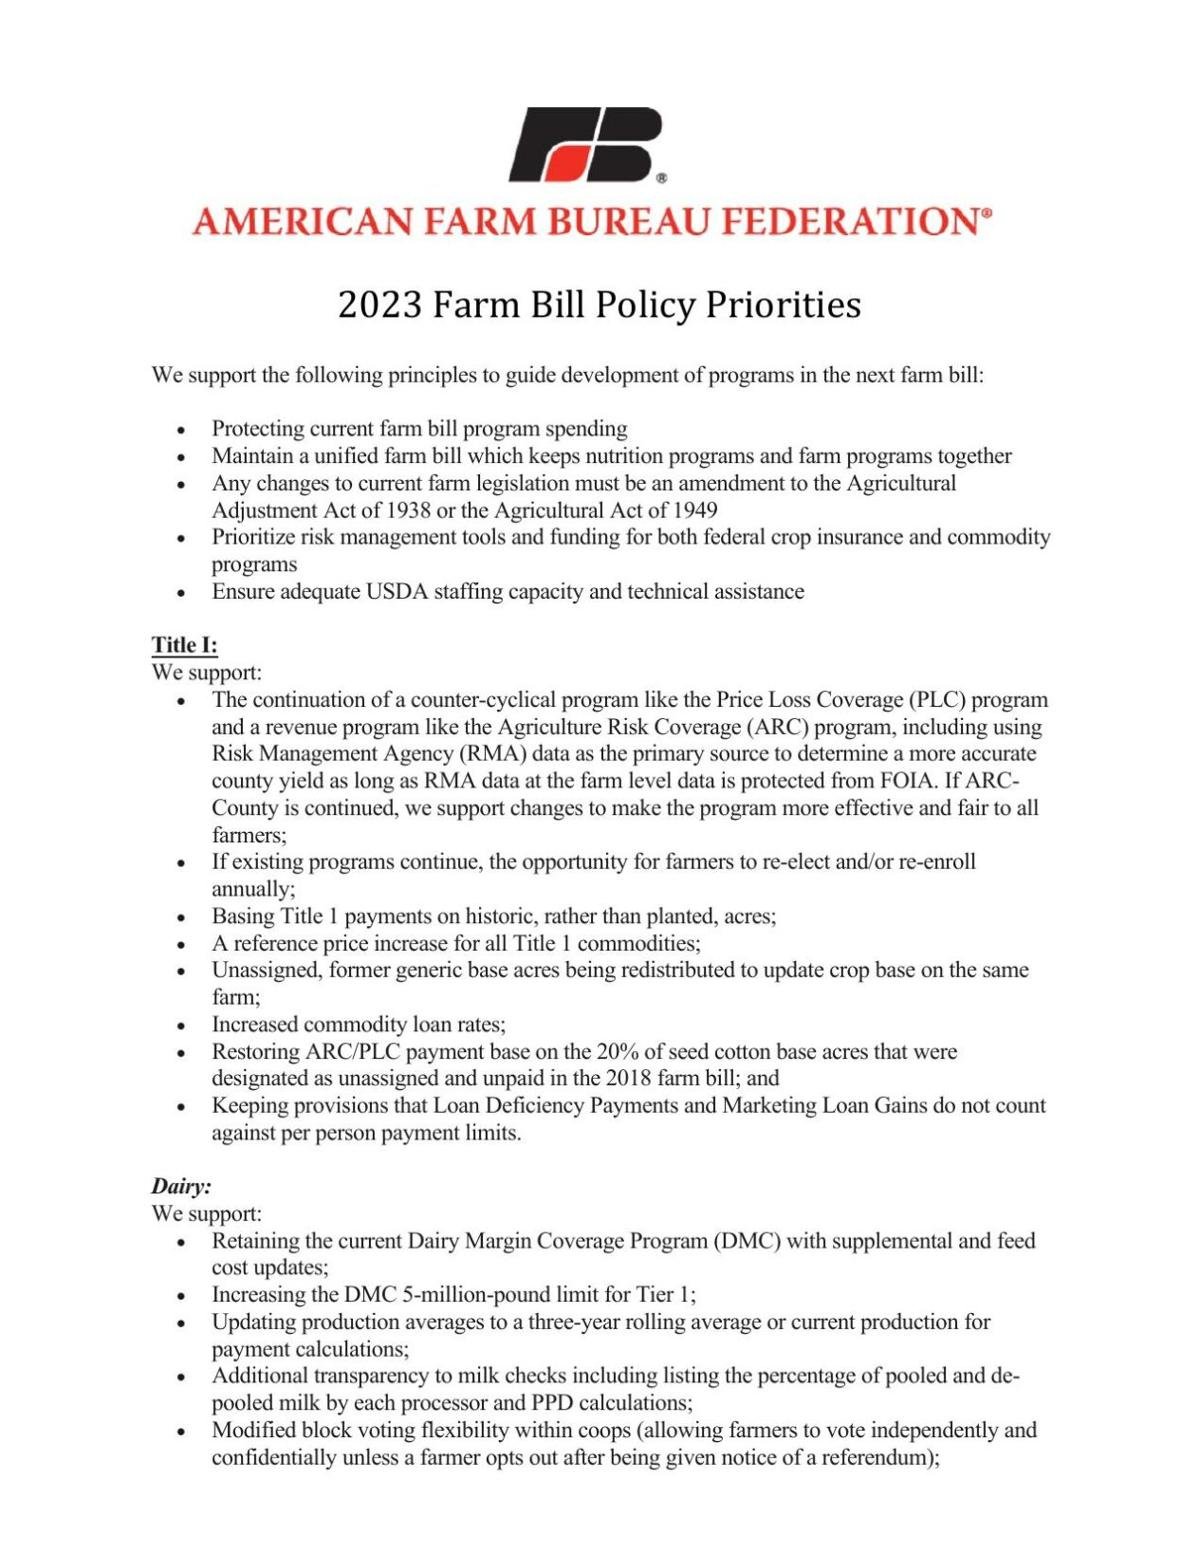 AFBF outlines priorities for 2023 farm bill National